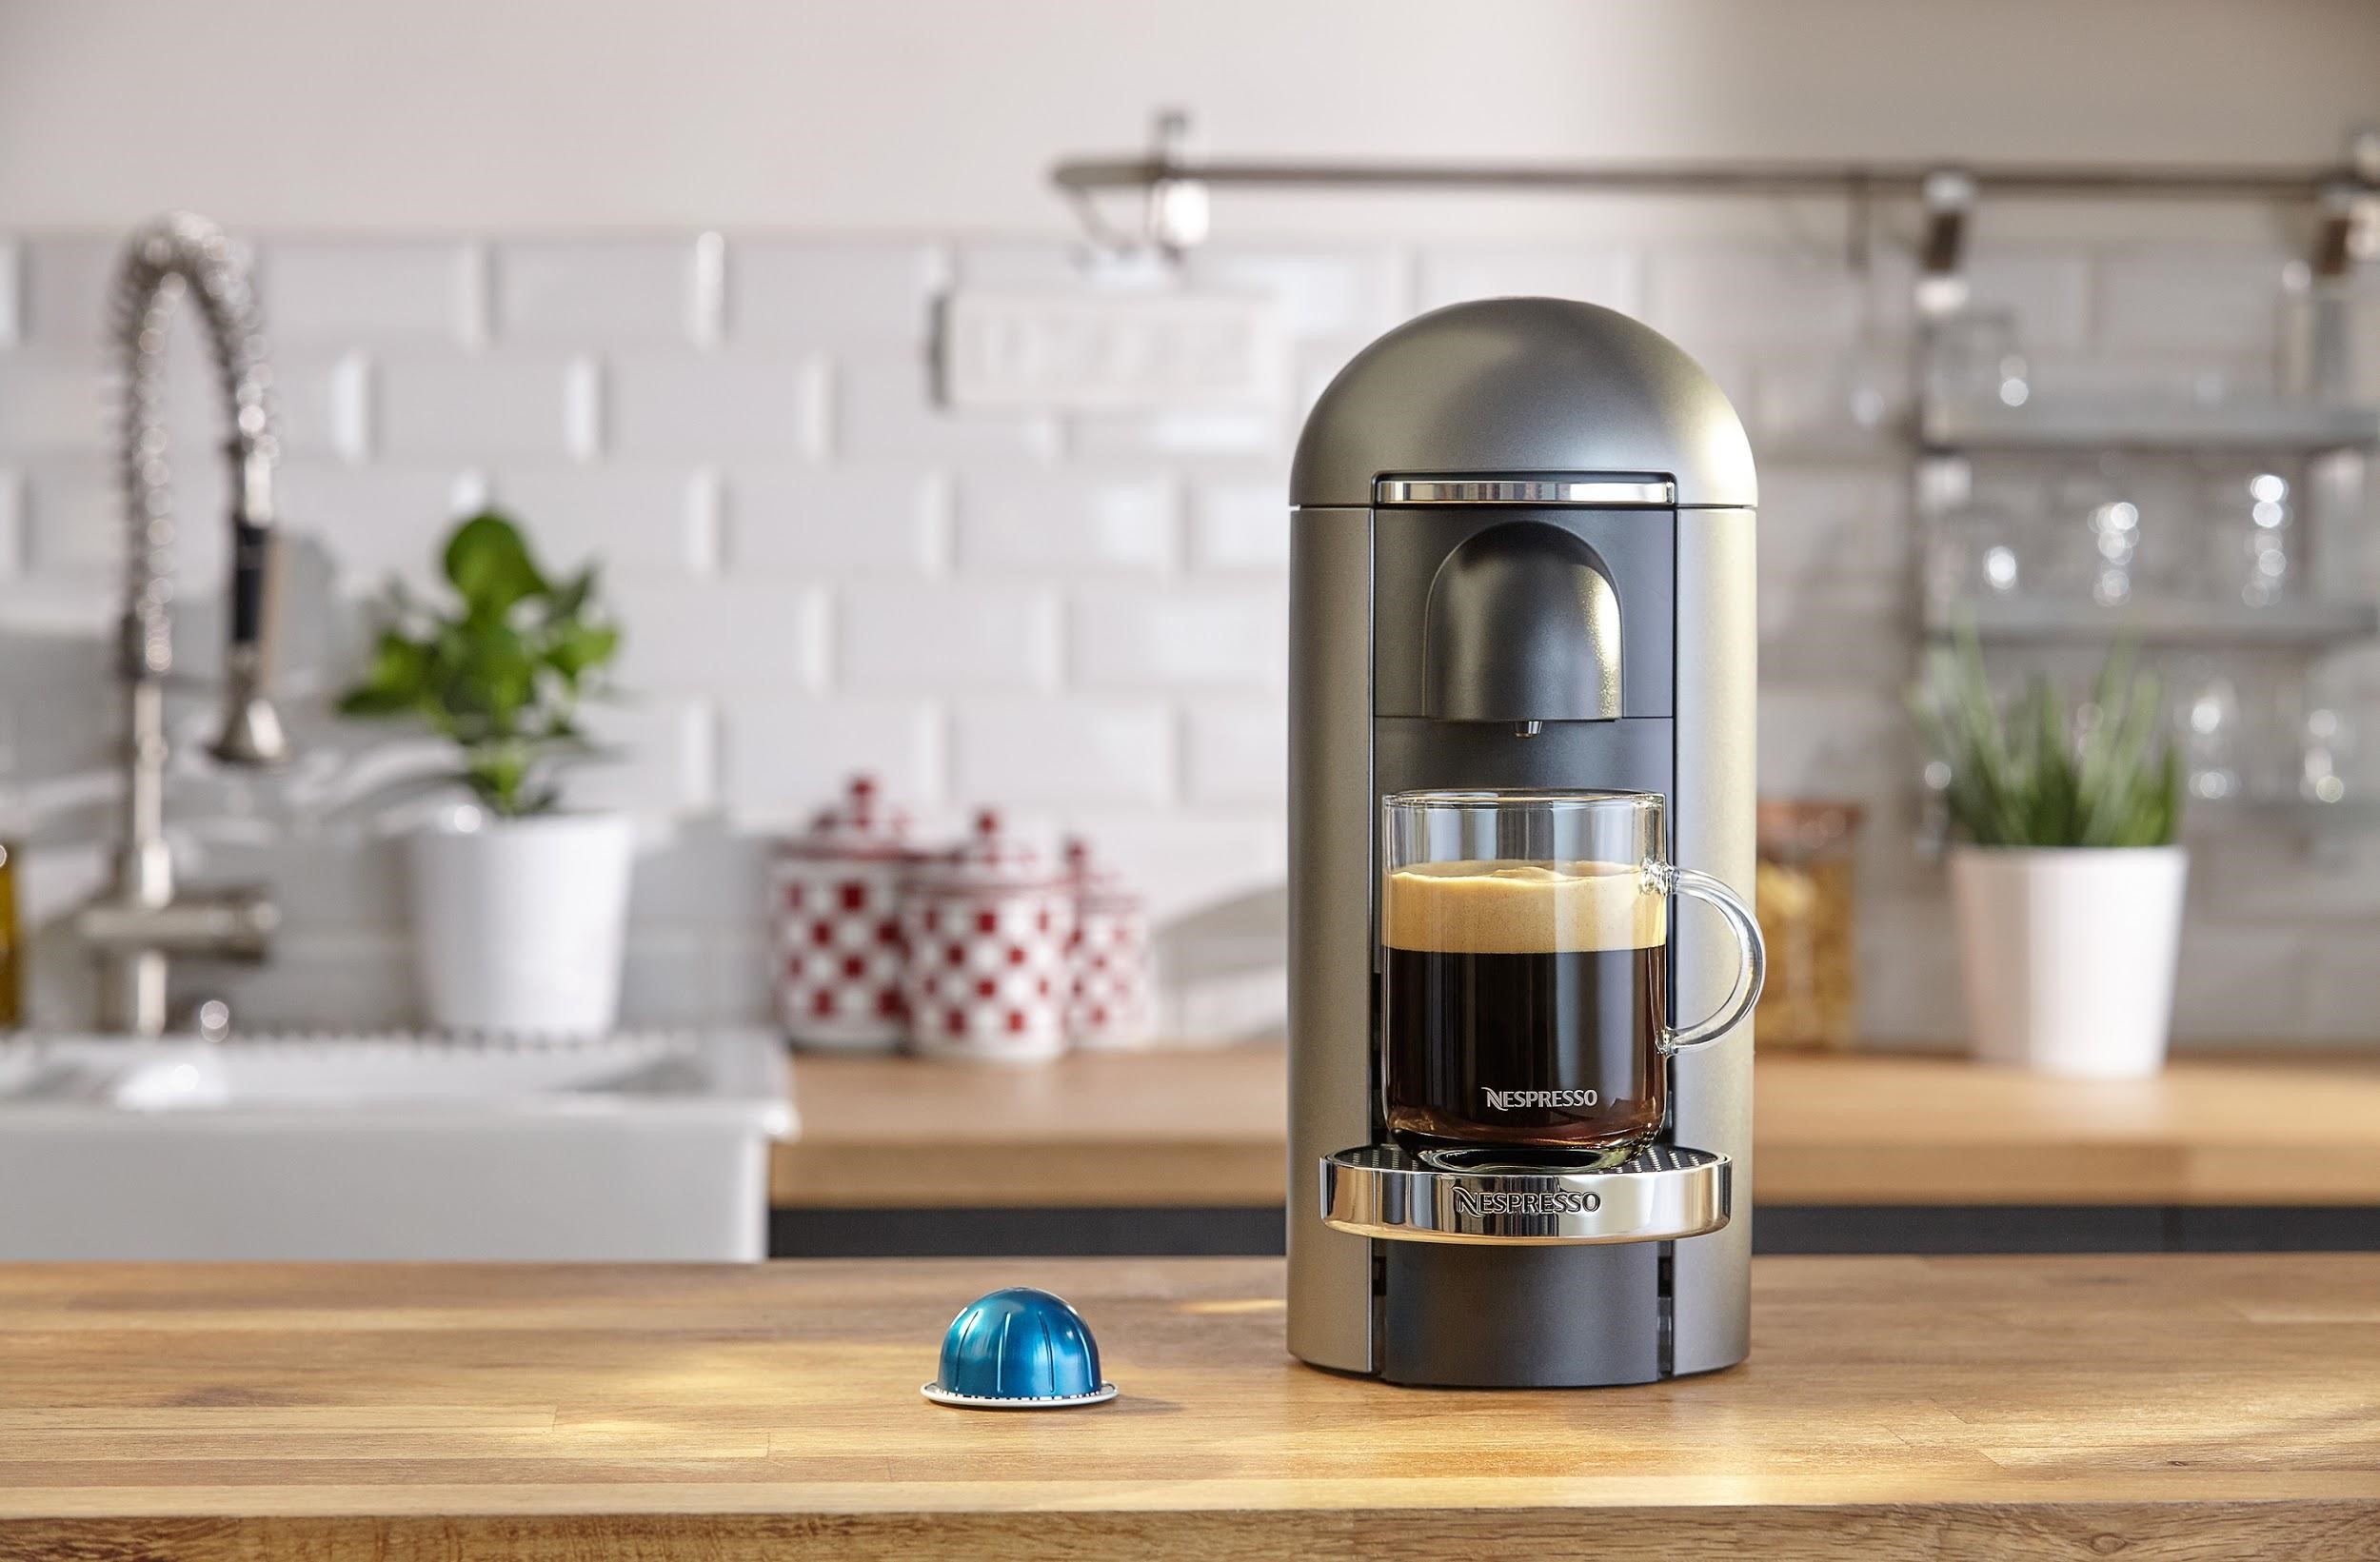 Nespresso Festive Sale is here! Enjoy up to 15% off selected coffee machines & accessories. - 3